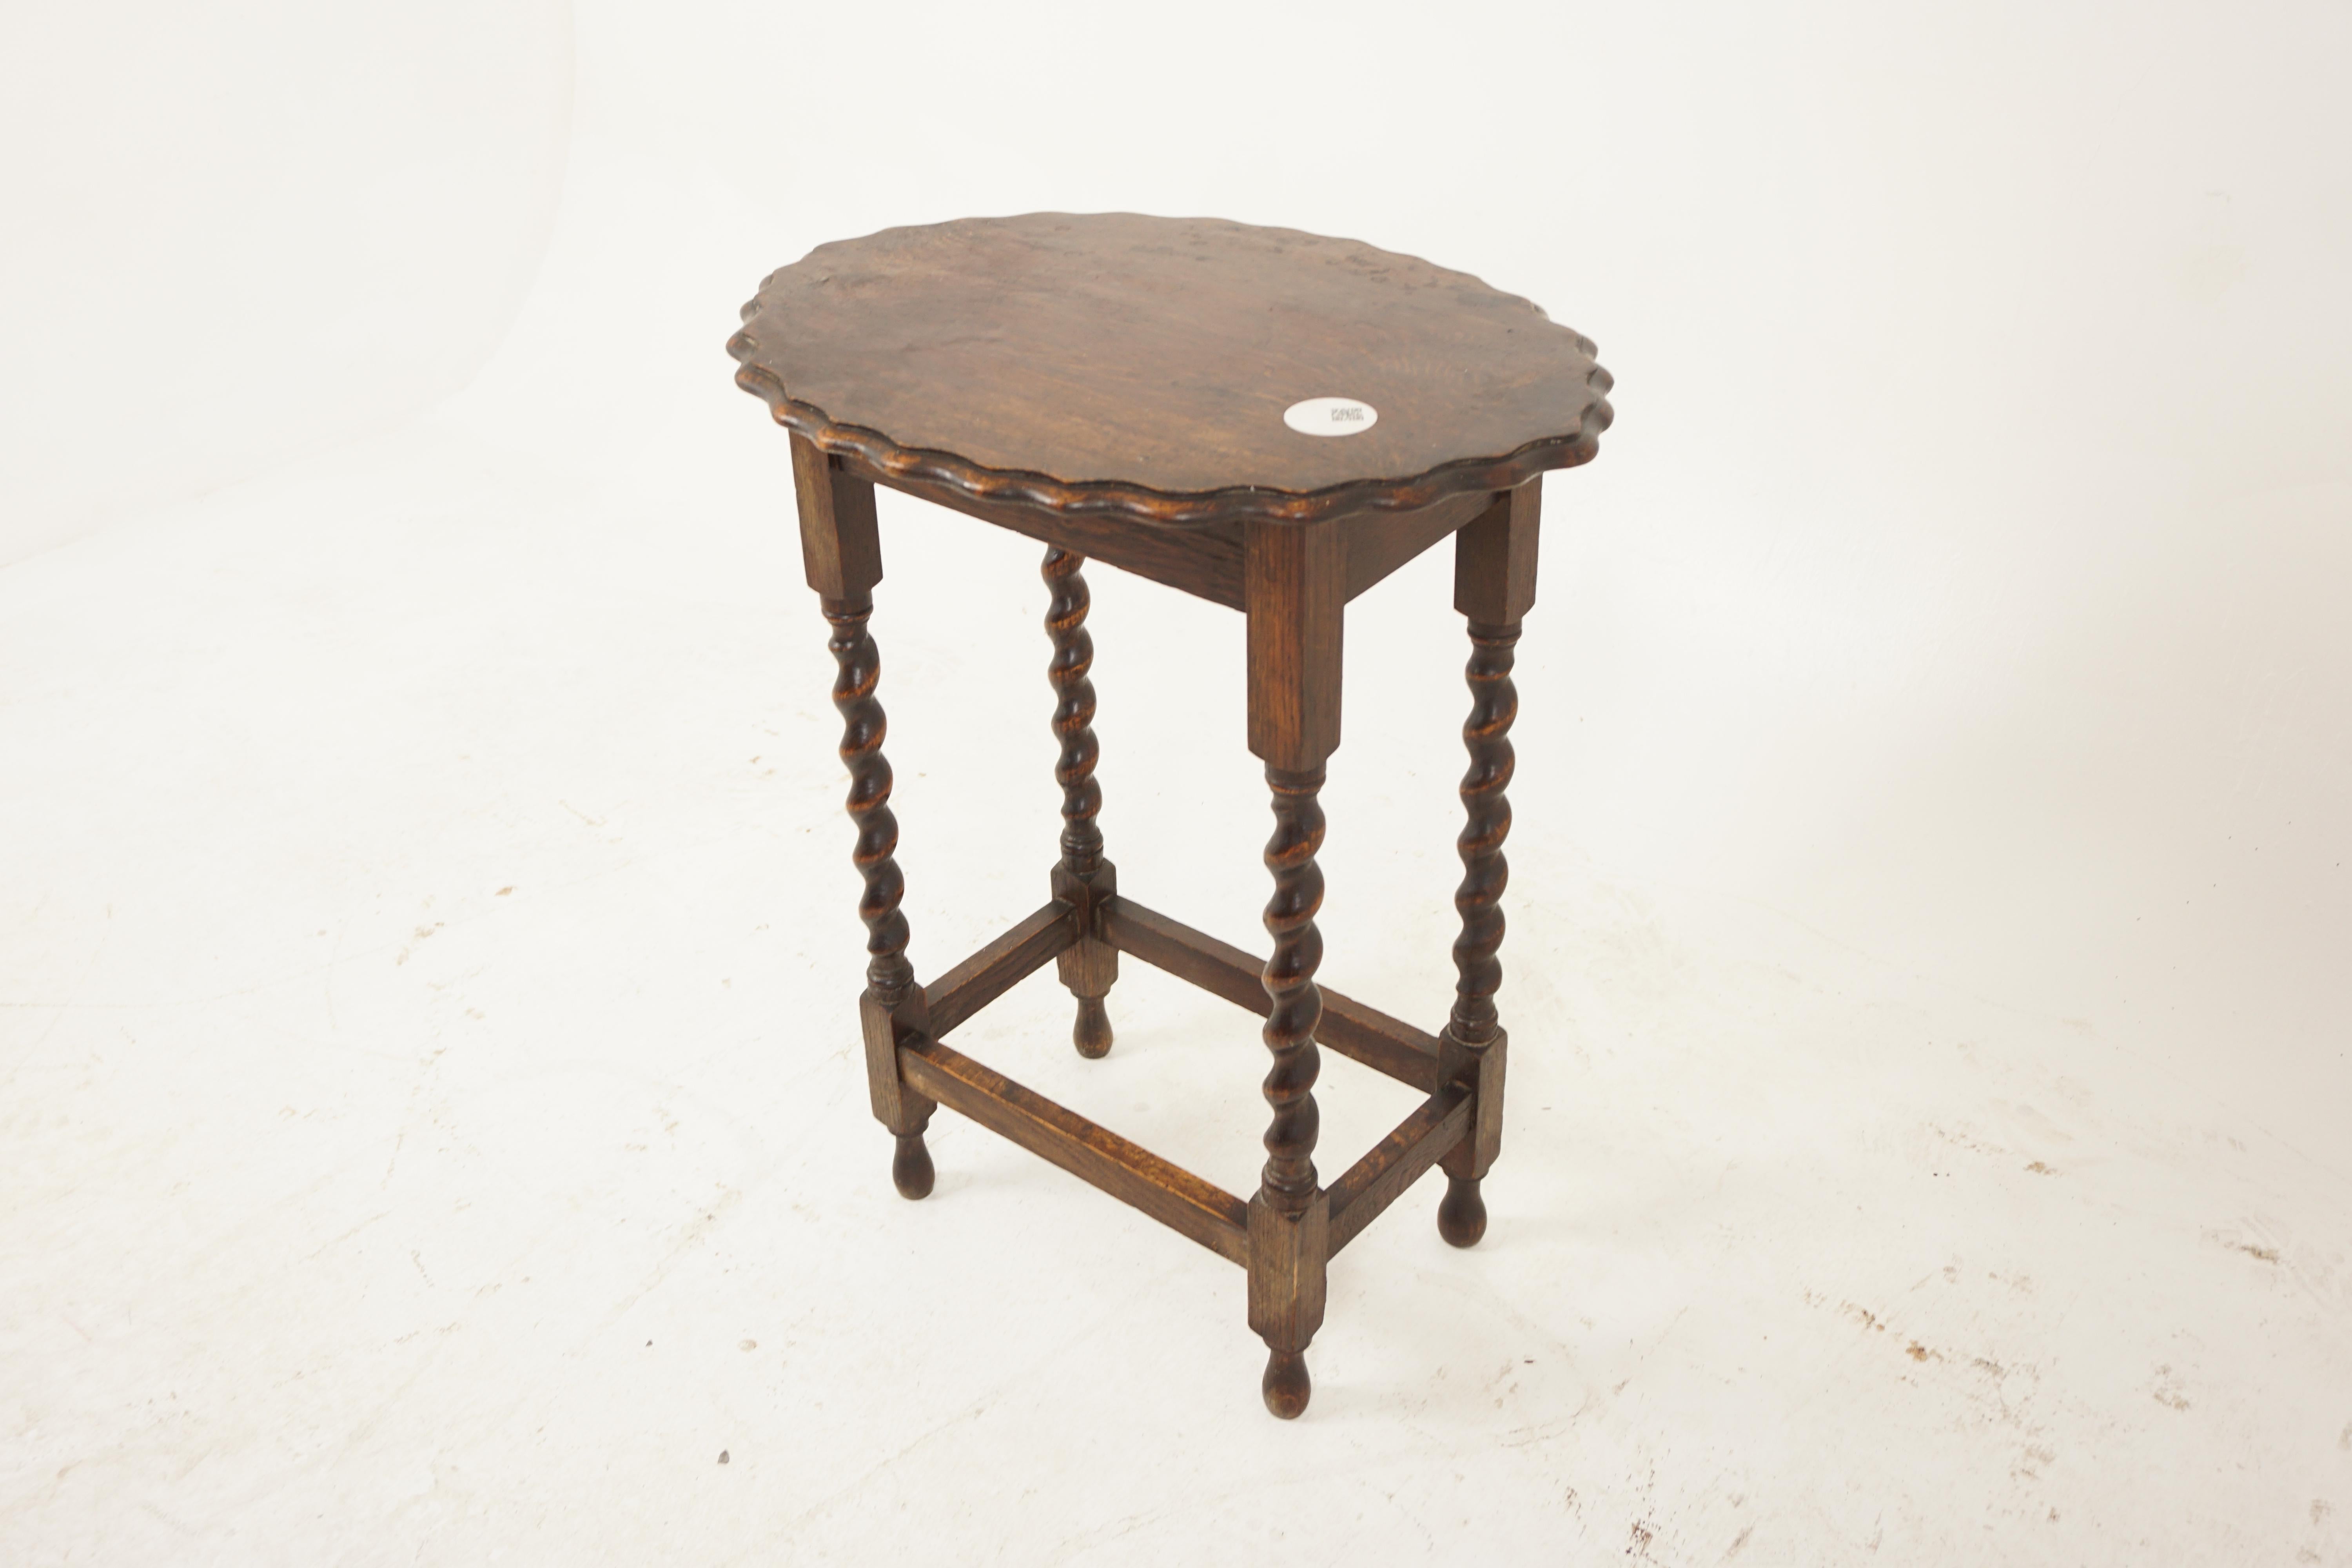 Vintage Oak Table, Oval Oak Barley Twist Occasional Table, Lamp and End Table, Antique Furniture, Scotland 1920, H1149

+ Scotland 1920
+ Solid Oak
+ Original Finish
+ Oval top with pie crust edge
+ All standing on four barley twist legs
+